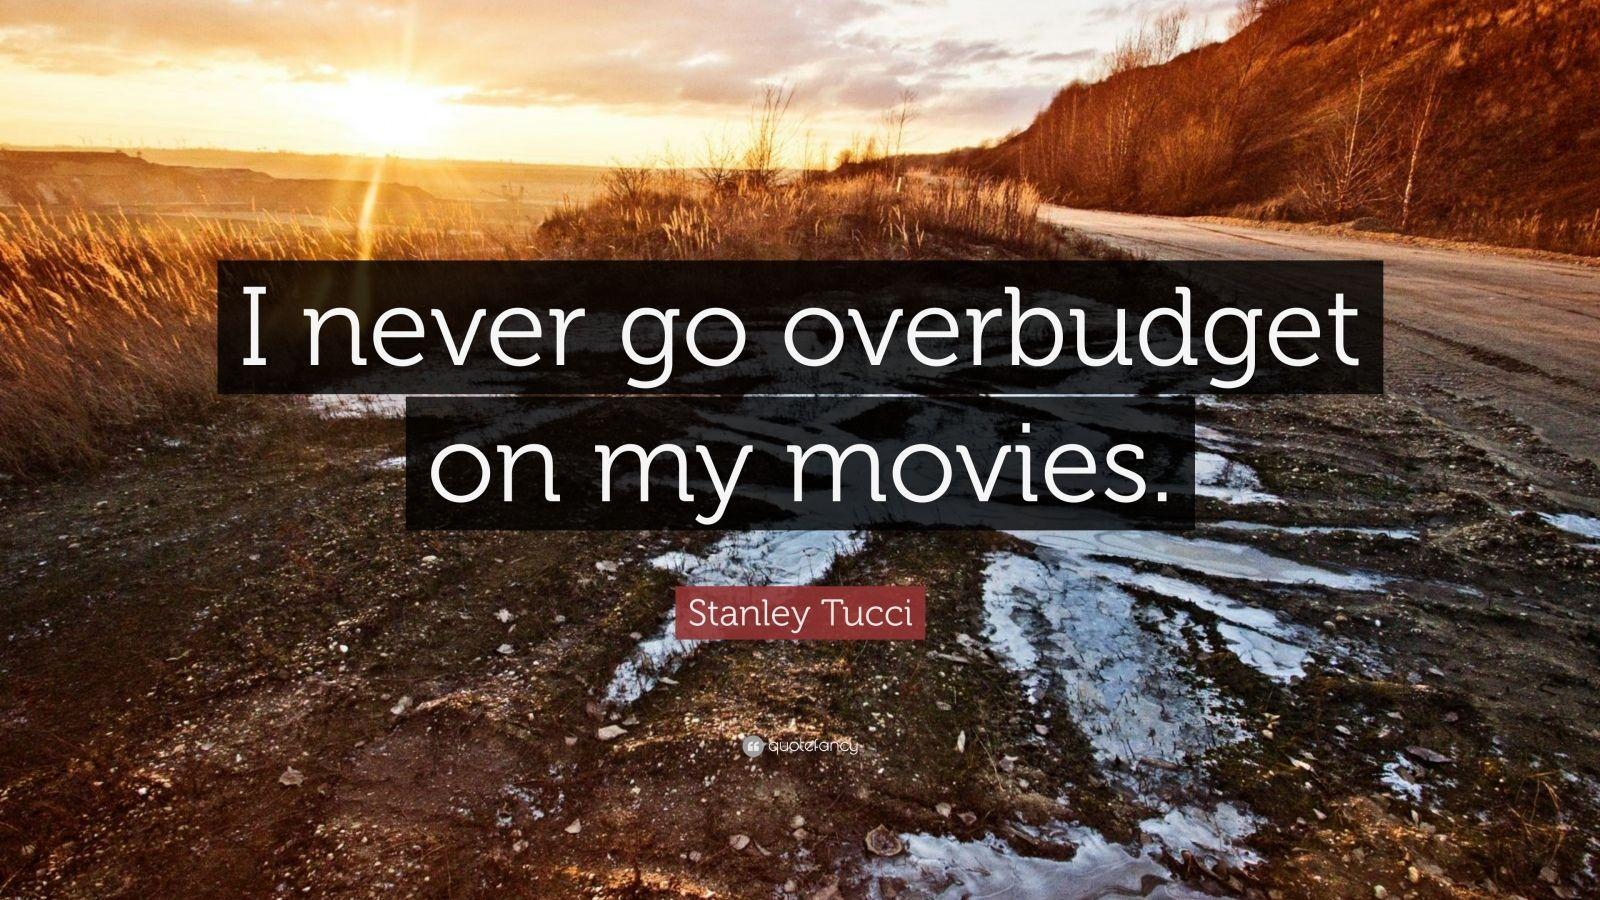 Stanley Tucci Quote: “I never go overbudget on my movies.” 5